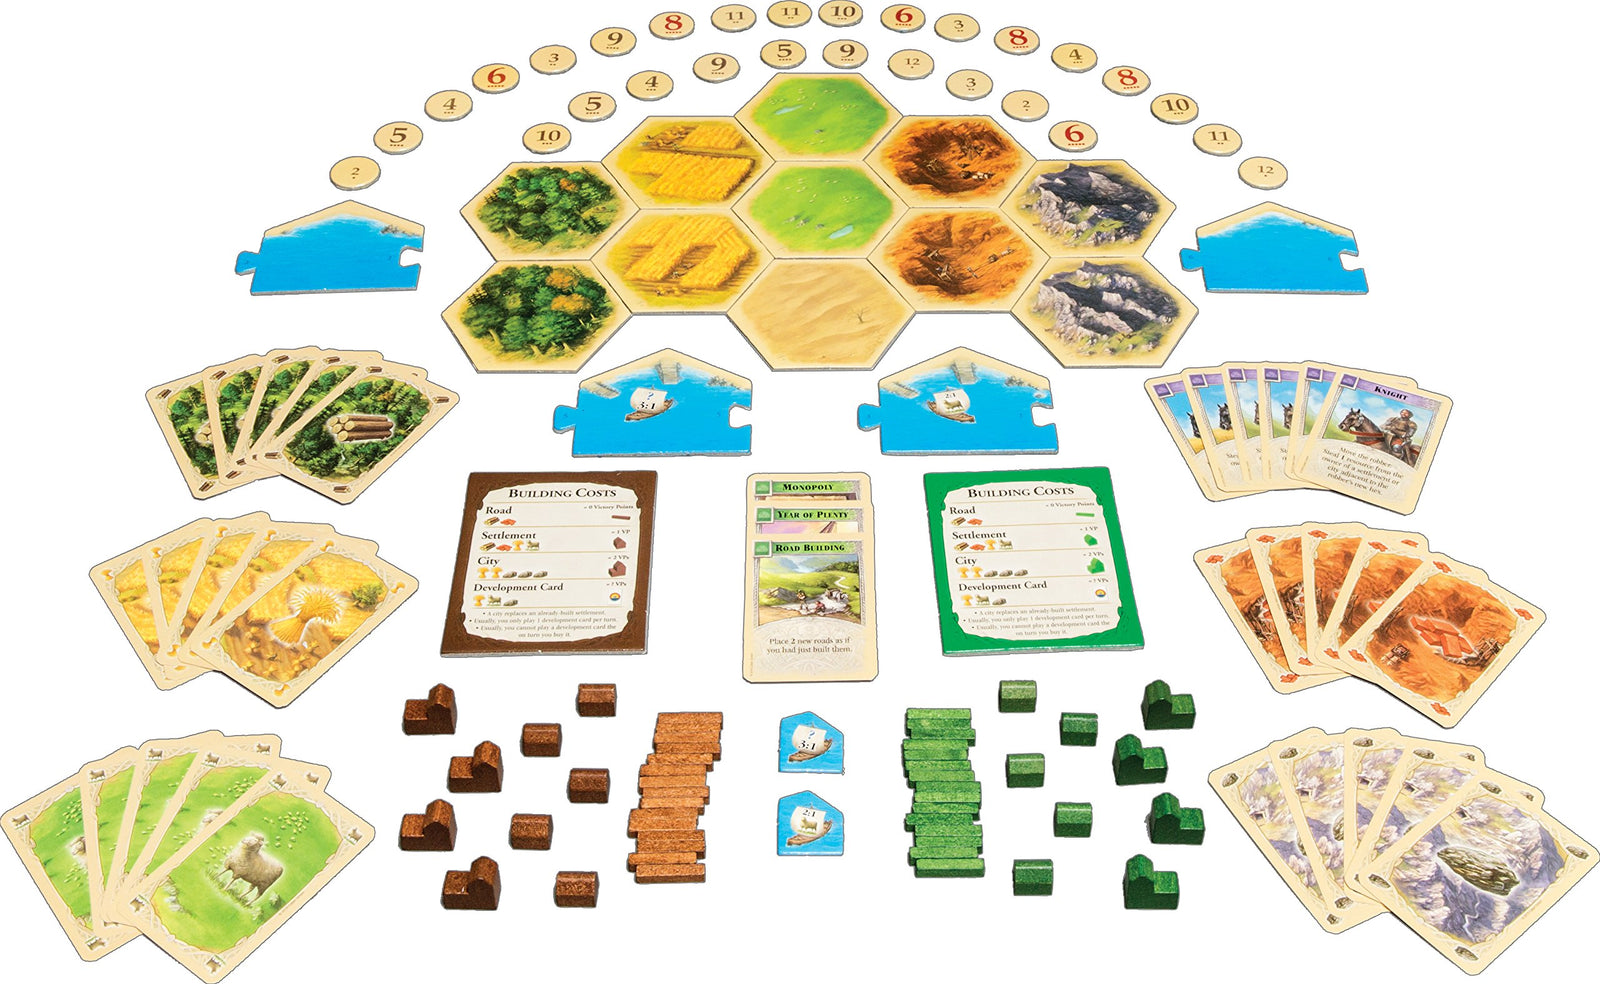 Catan Board Game Extension Allowing a Total of 5 to 6 Players for The Catan Board Game | Family Board Game | Board Game for Adults and Family | Adventure Board Game | Made by Catan Studio